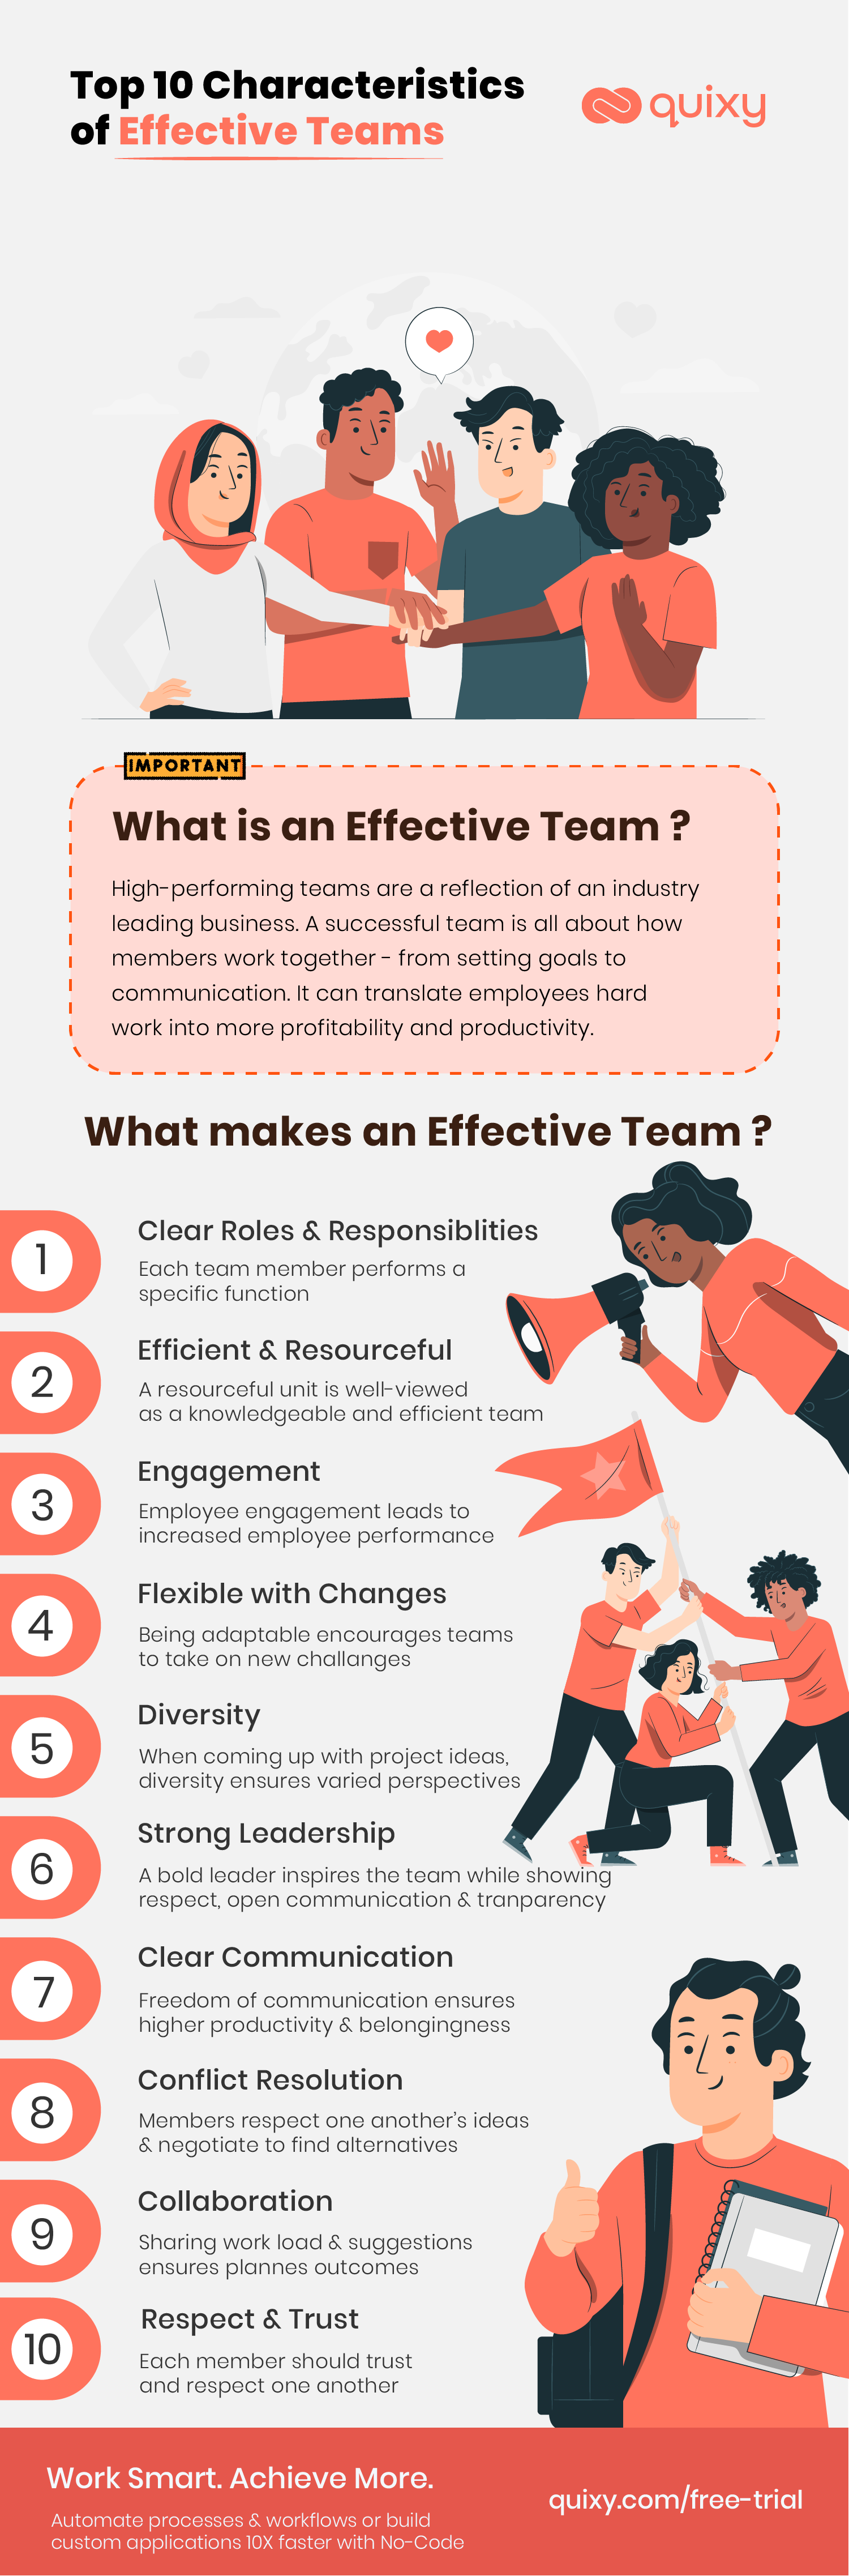 Top 10 Characteristics of Effective Teams Infographic